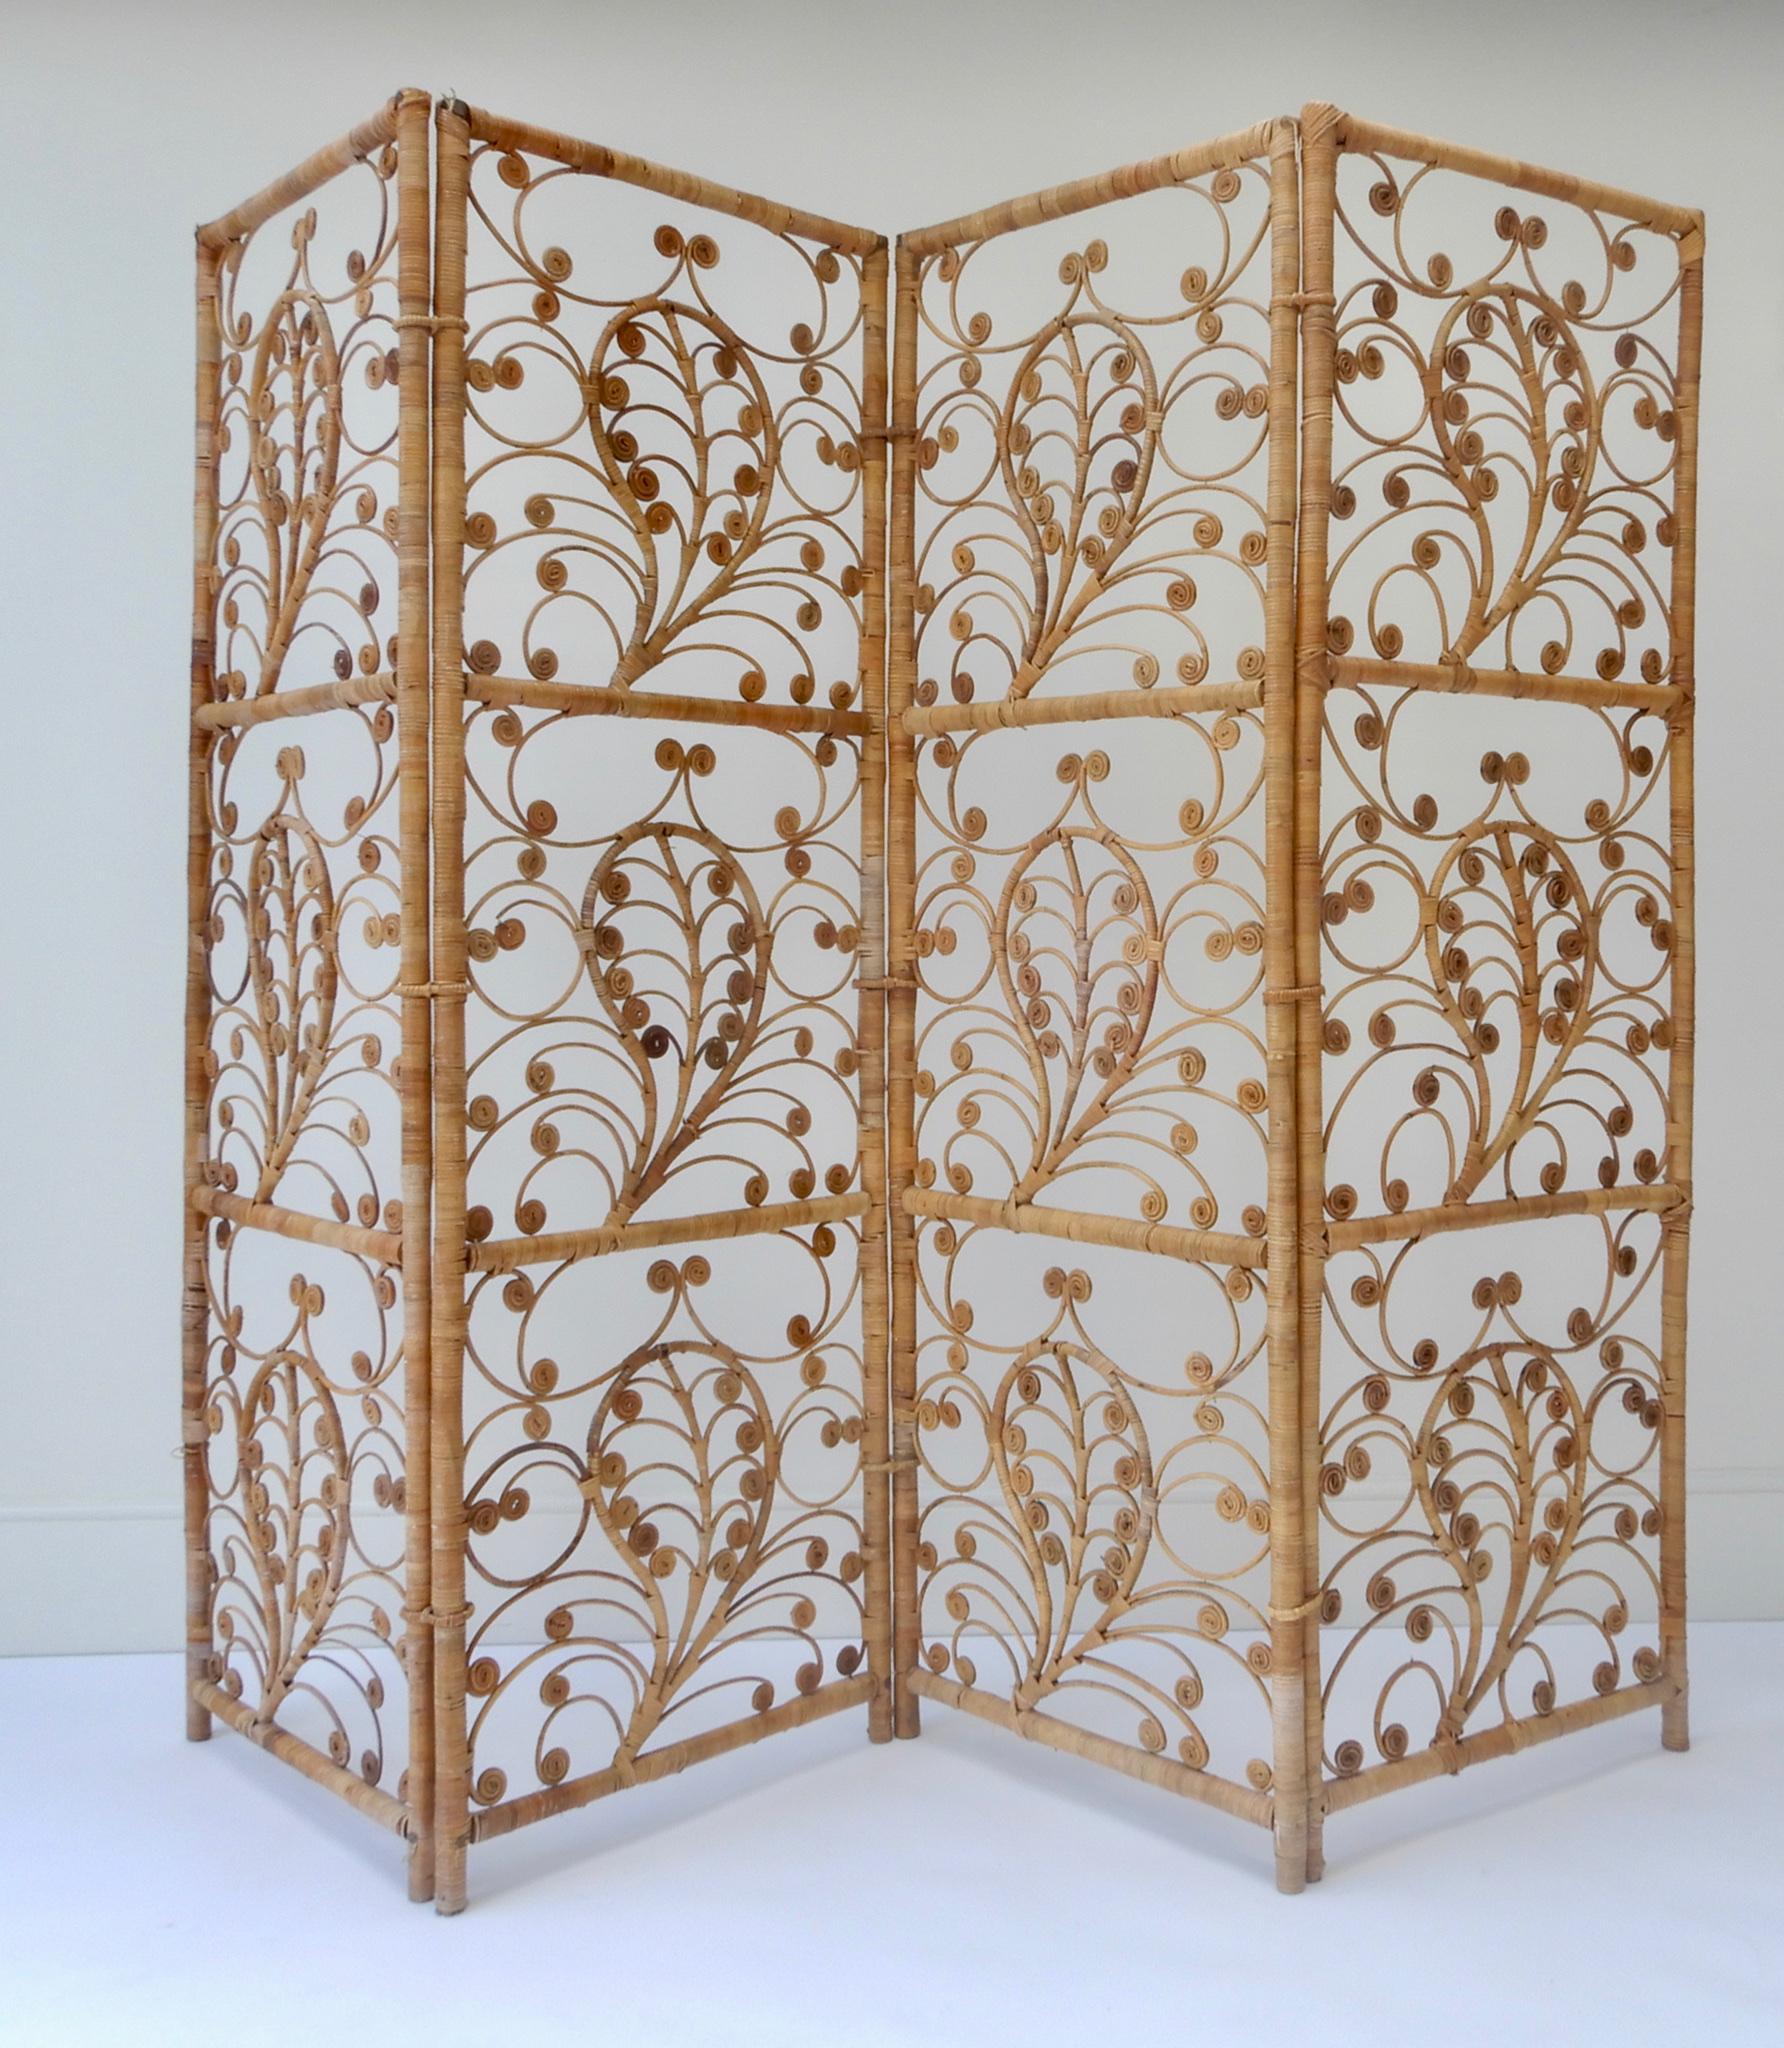 Bohemian Four-Panel Rattan Screen Room Divider, 1940s For Sale